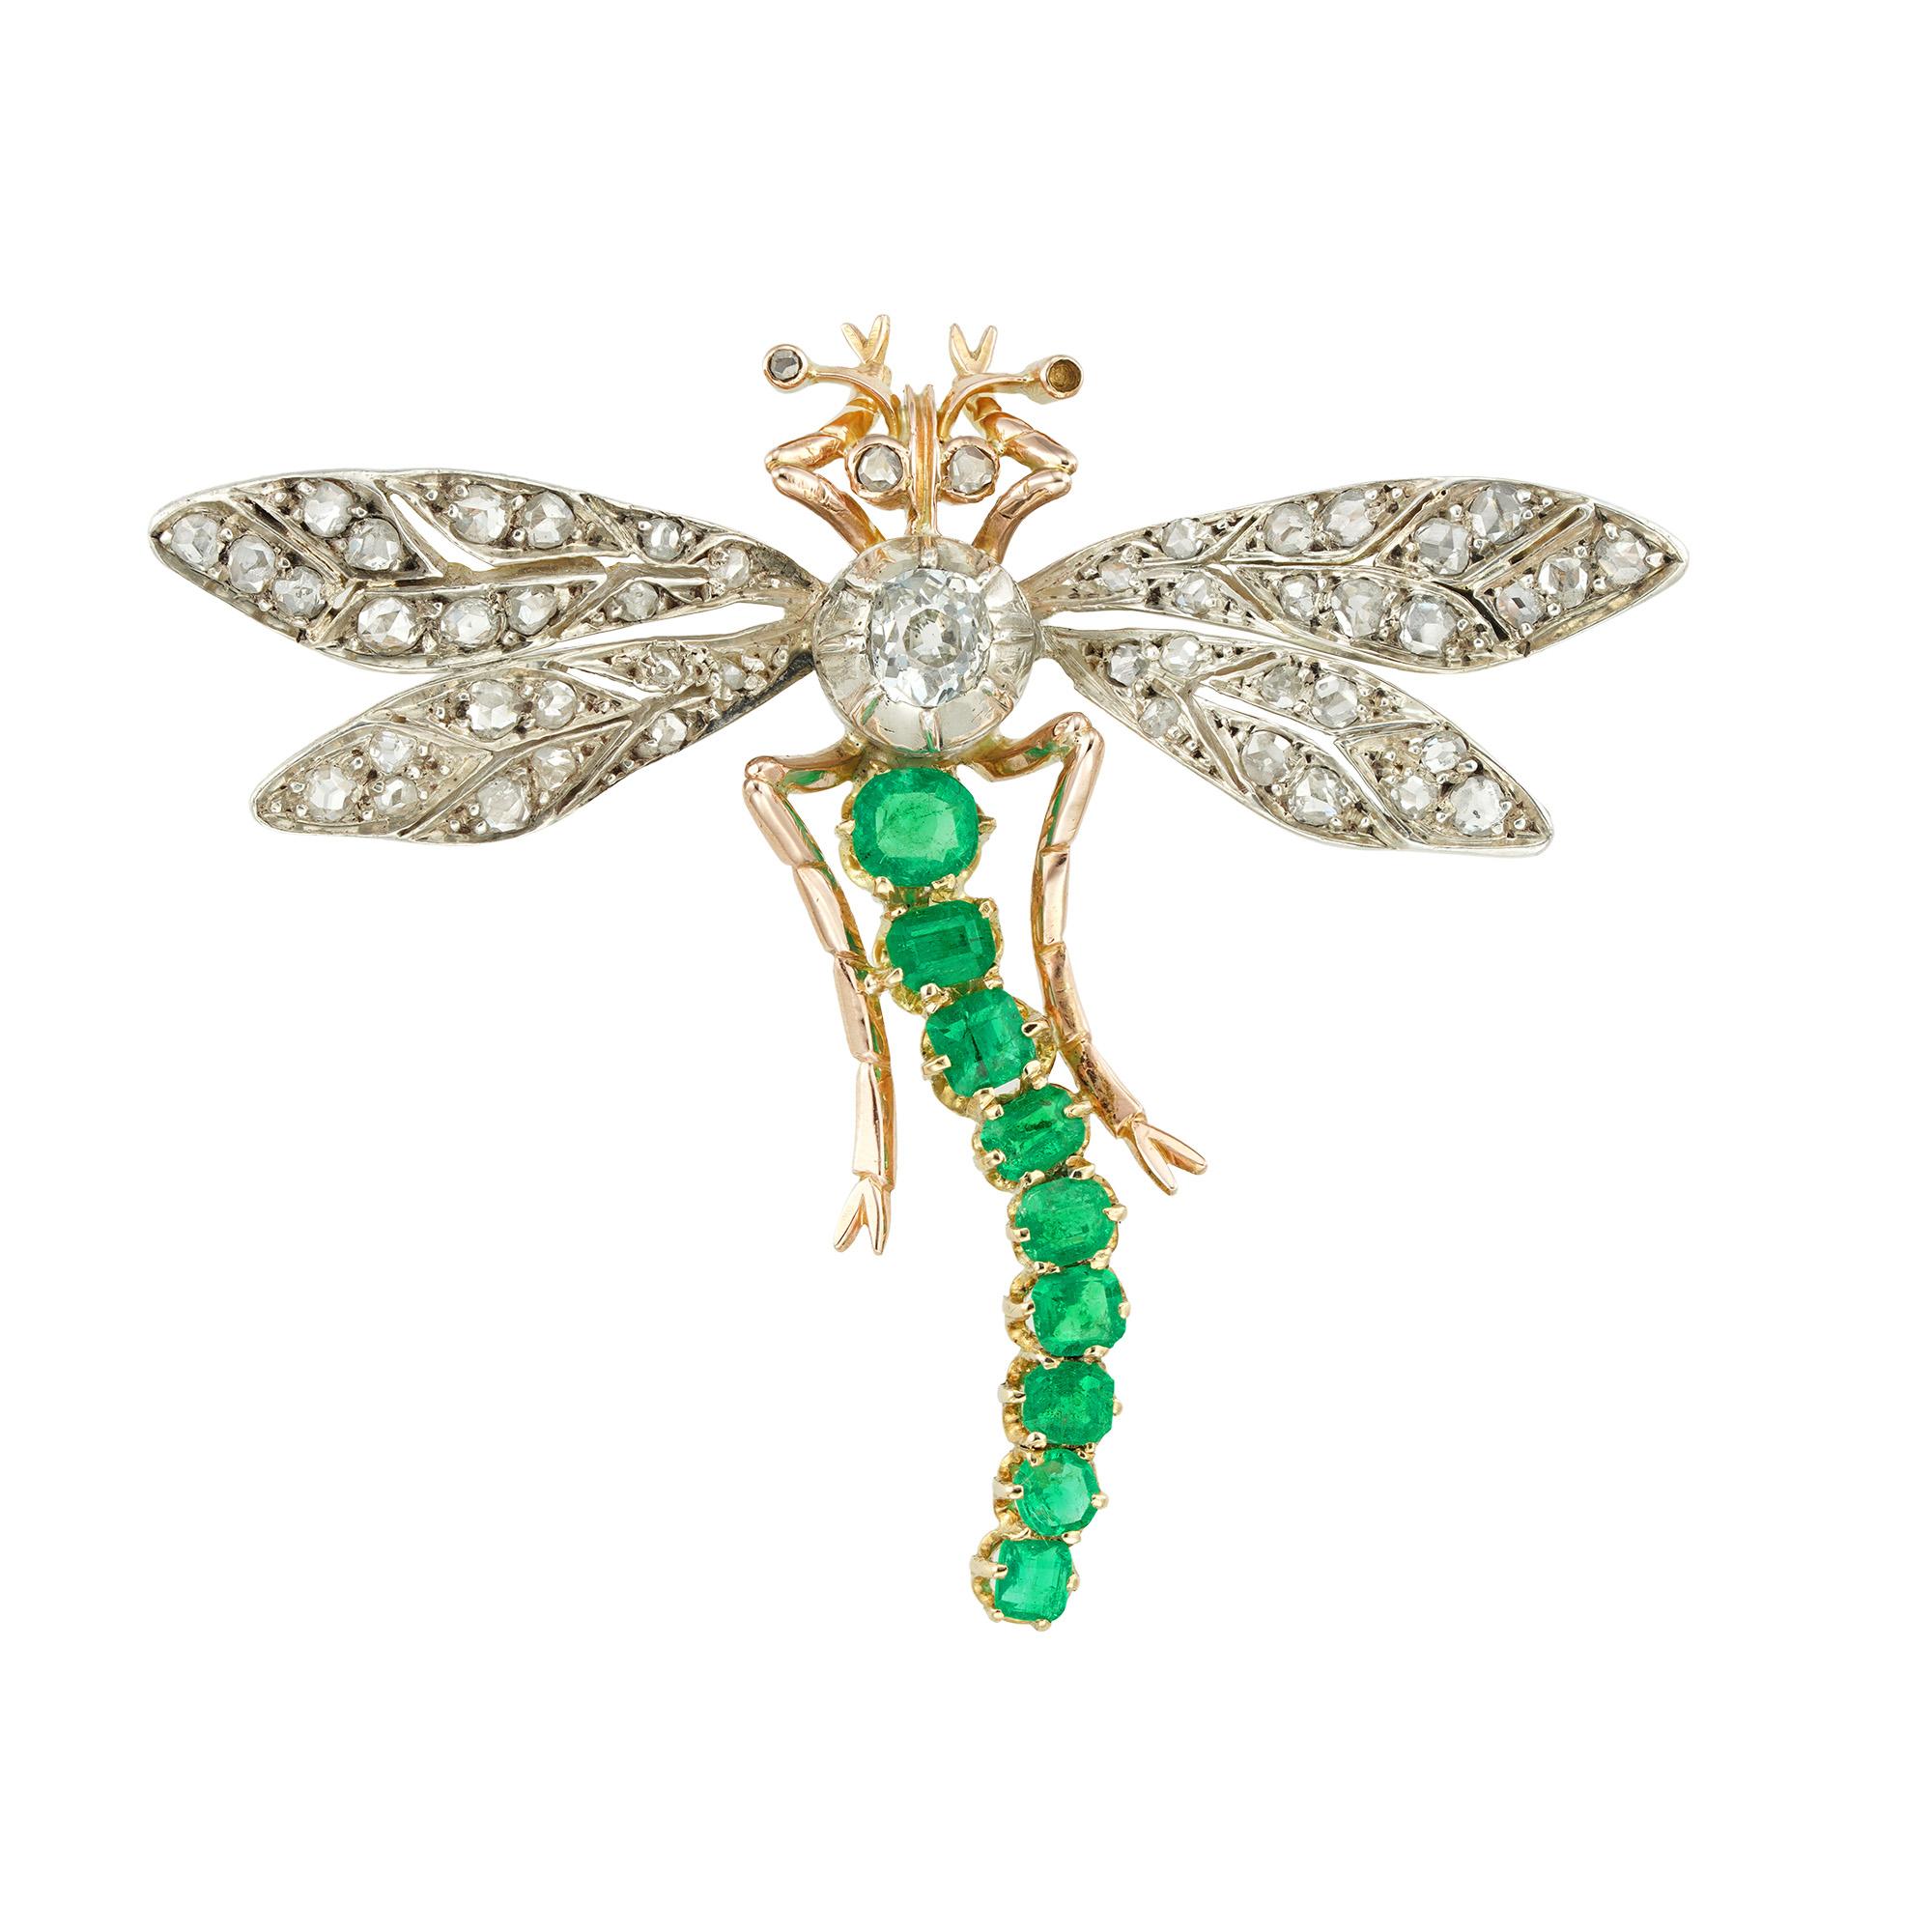 A late 19th century emerald and diamond dragonfly brooch, the body set with an old European-cut diamond estimated to weigh 0.4 carat, the tail set with nine faceted emeralds estimated to weigh approximately 1.2 carats in total the wings and the eyes